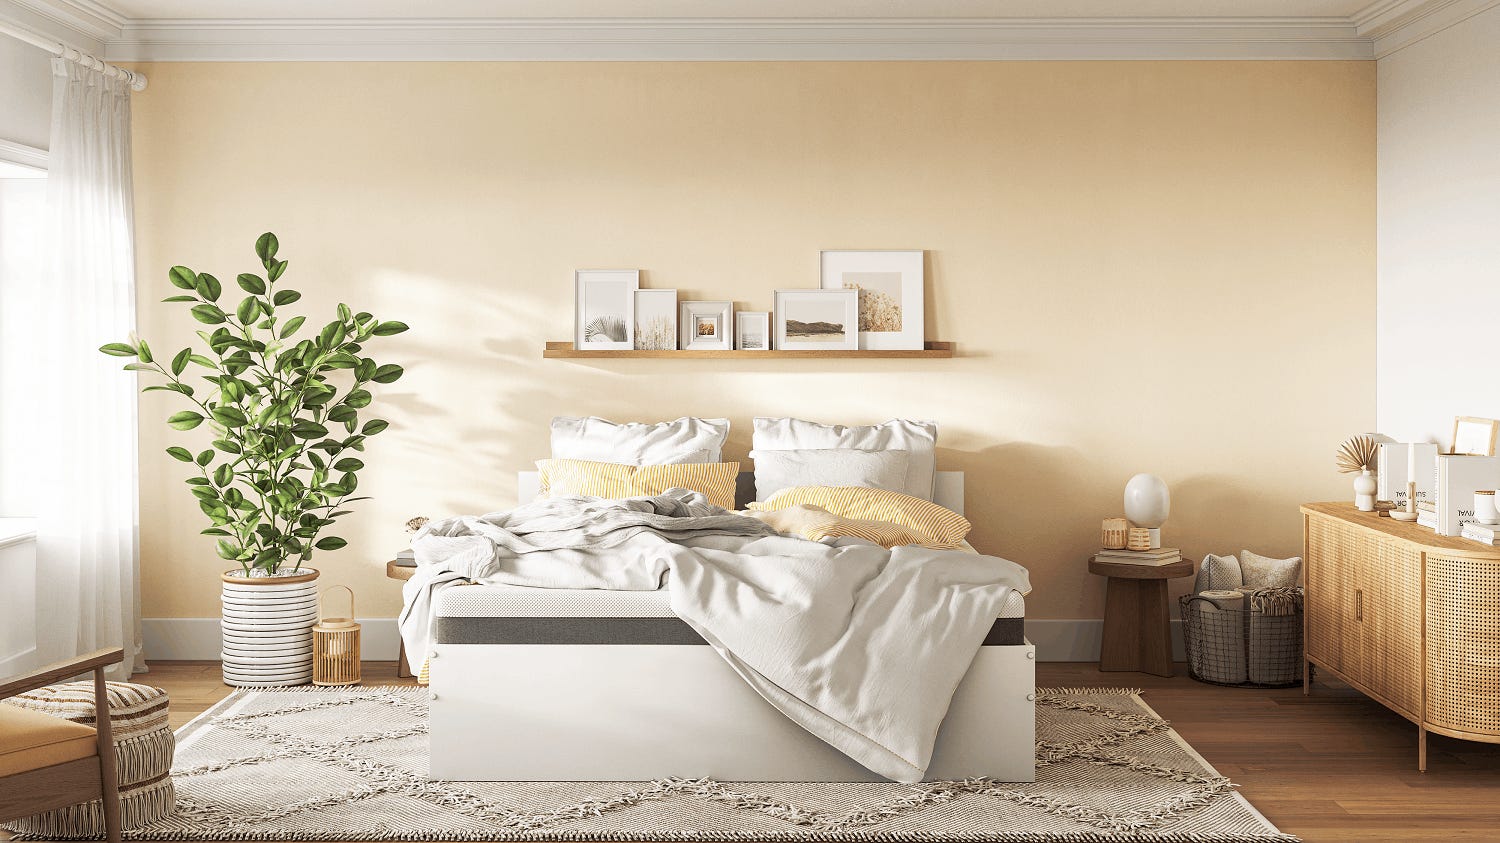 White-wooden-bed-front-view